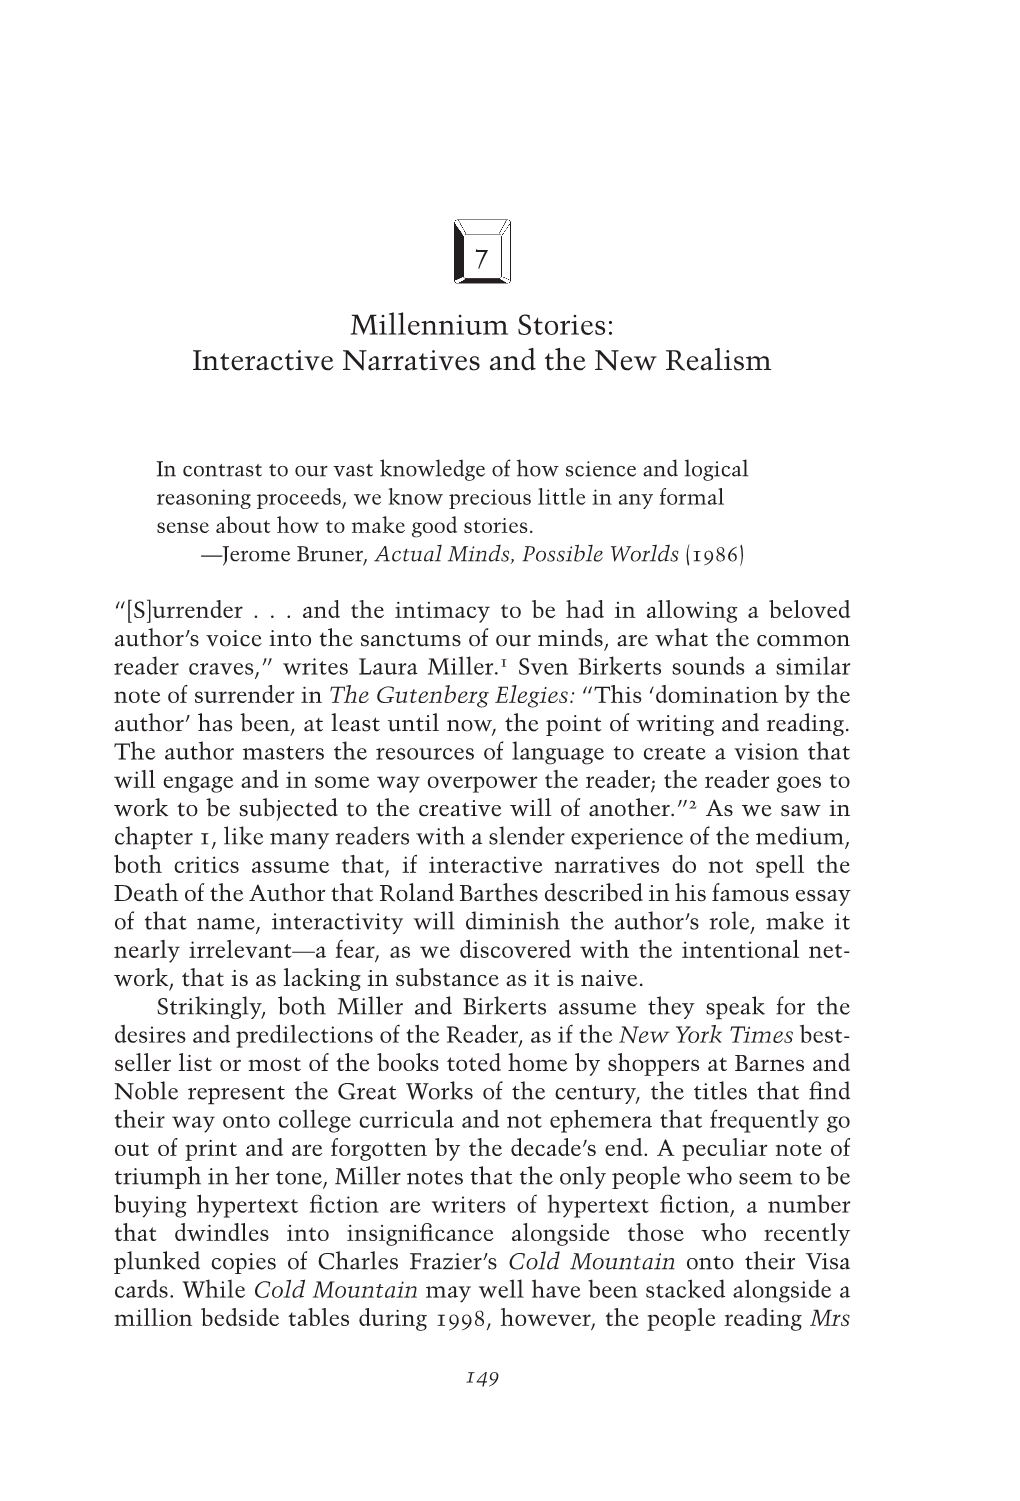 Millennium Stories: Interactive Narratives and the New Realism